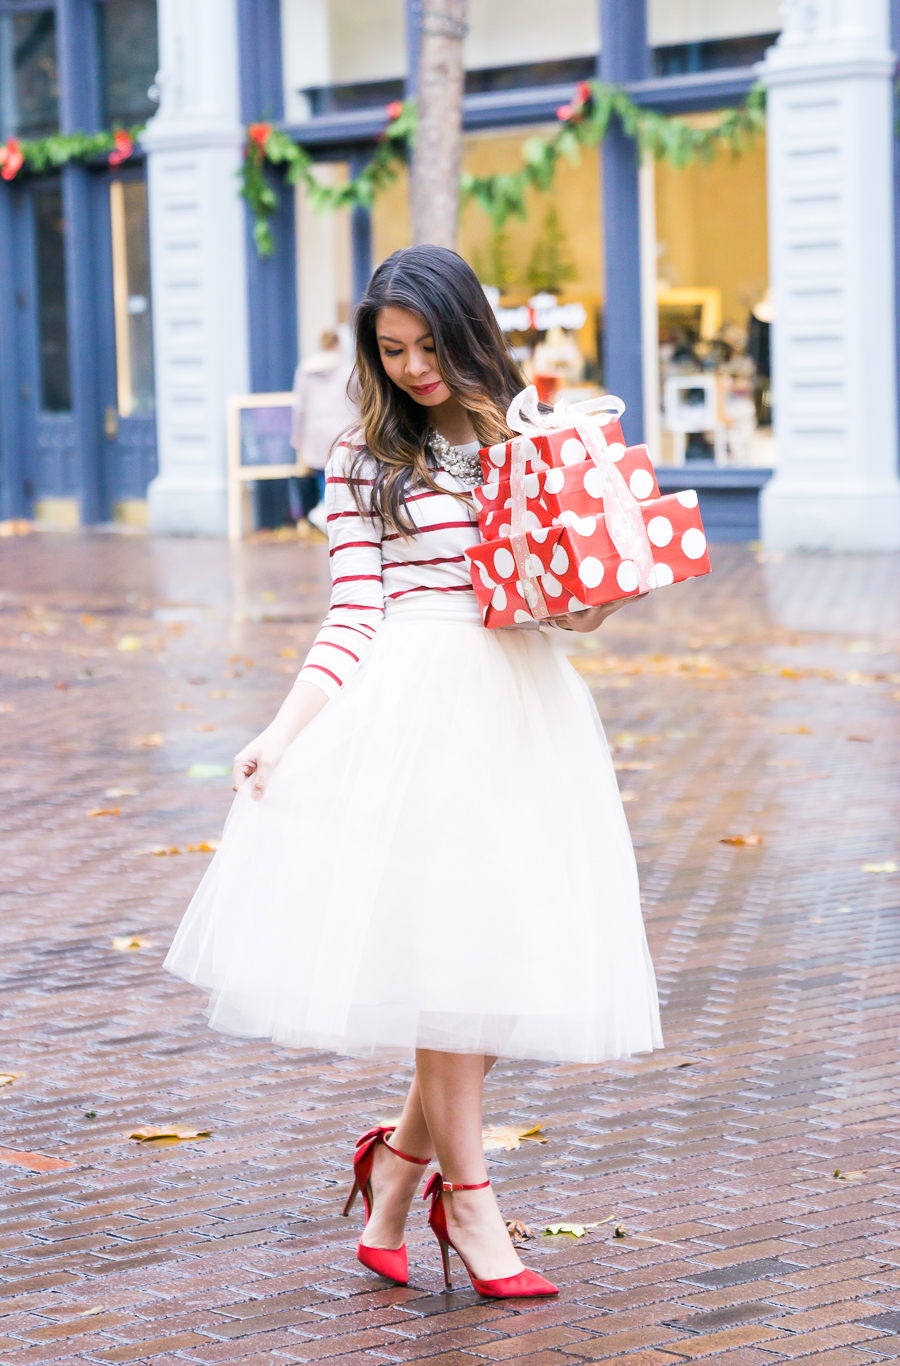 Winter White Tulle for the Casual Bride - Gl Diaries